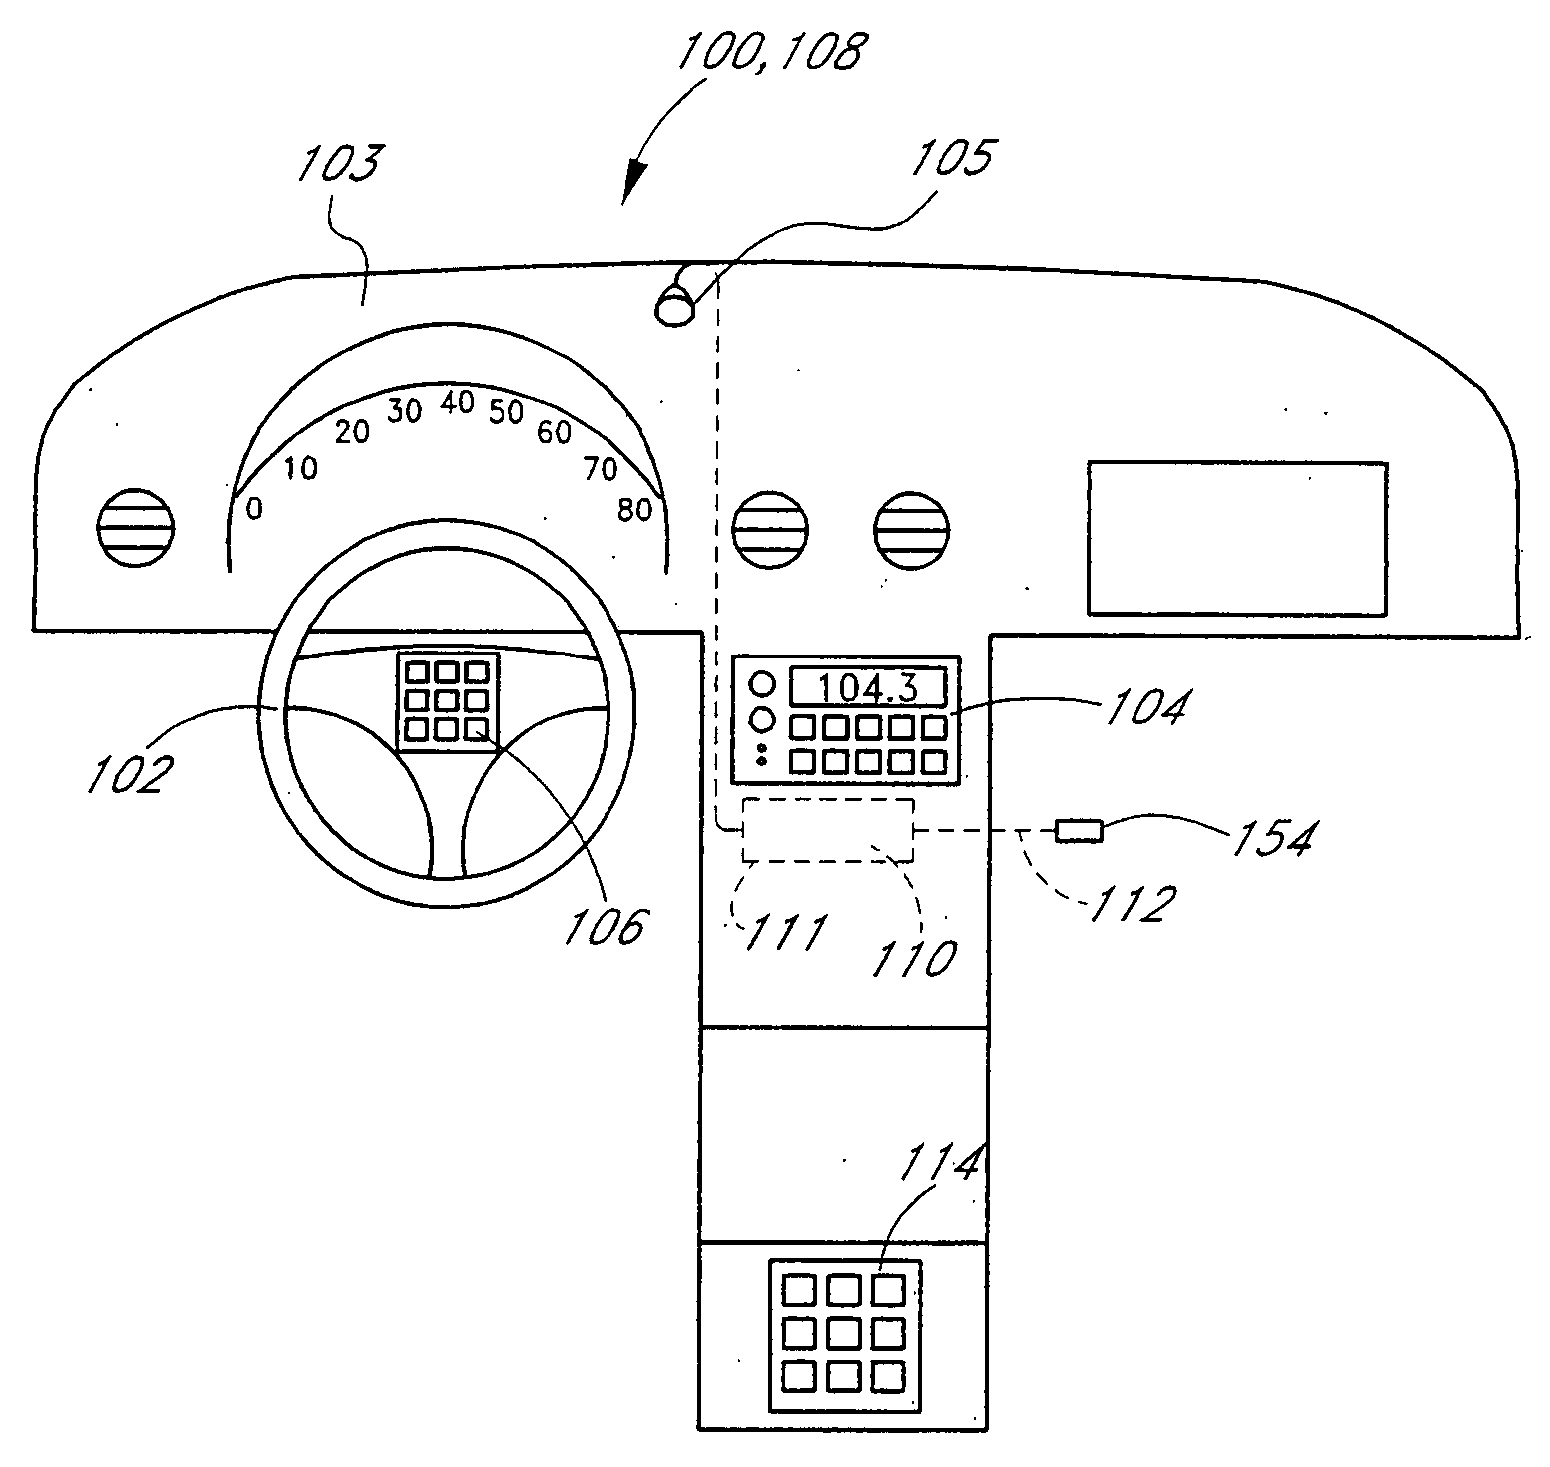 Vehicle remote control interface for controlling multiple electronic devices